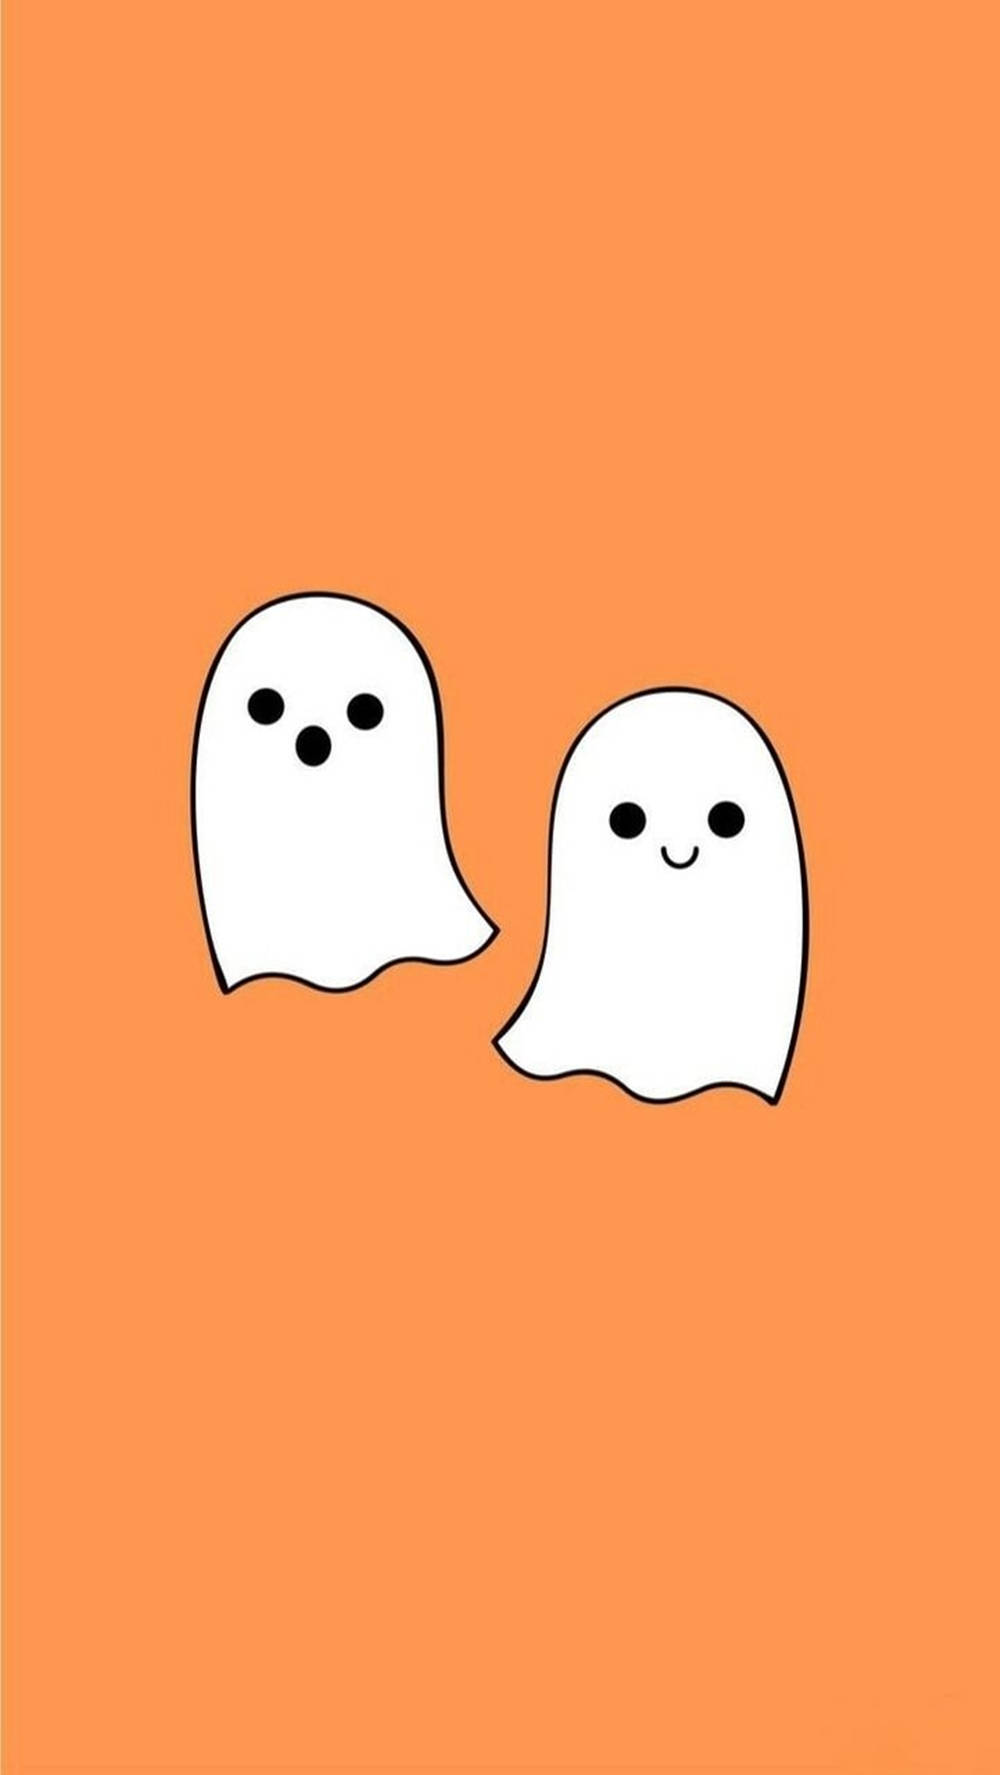 Two Friendly Ghosts Aesthetic Orange Background